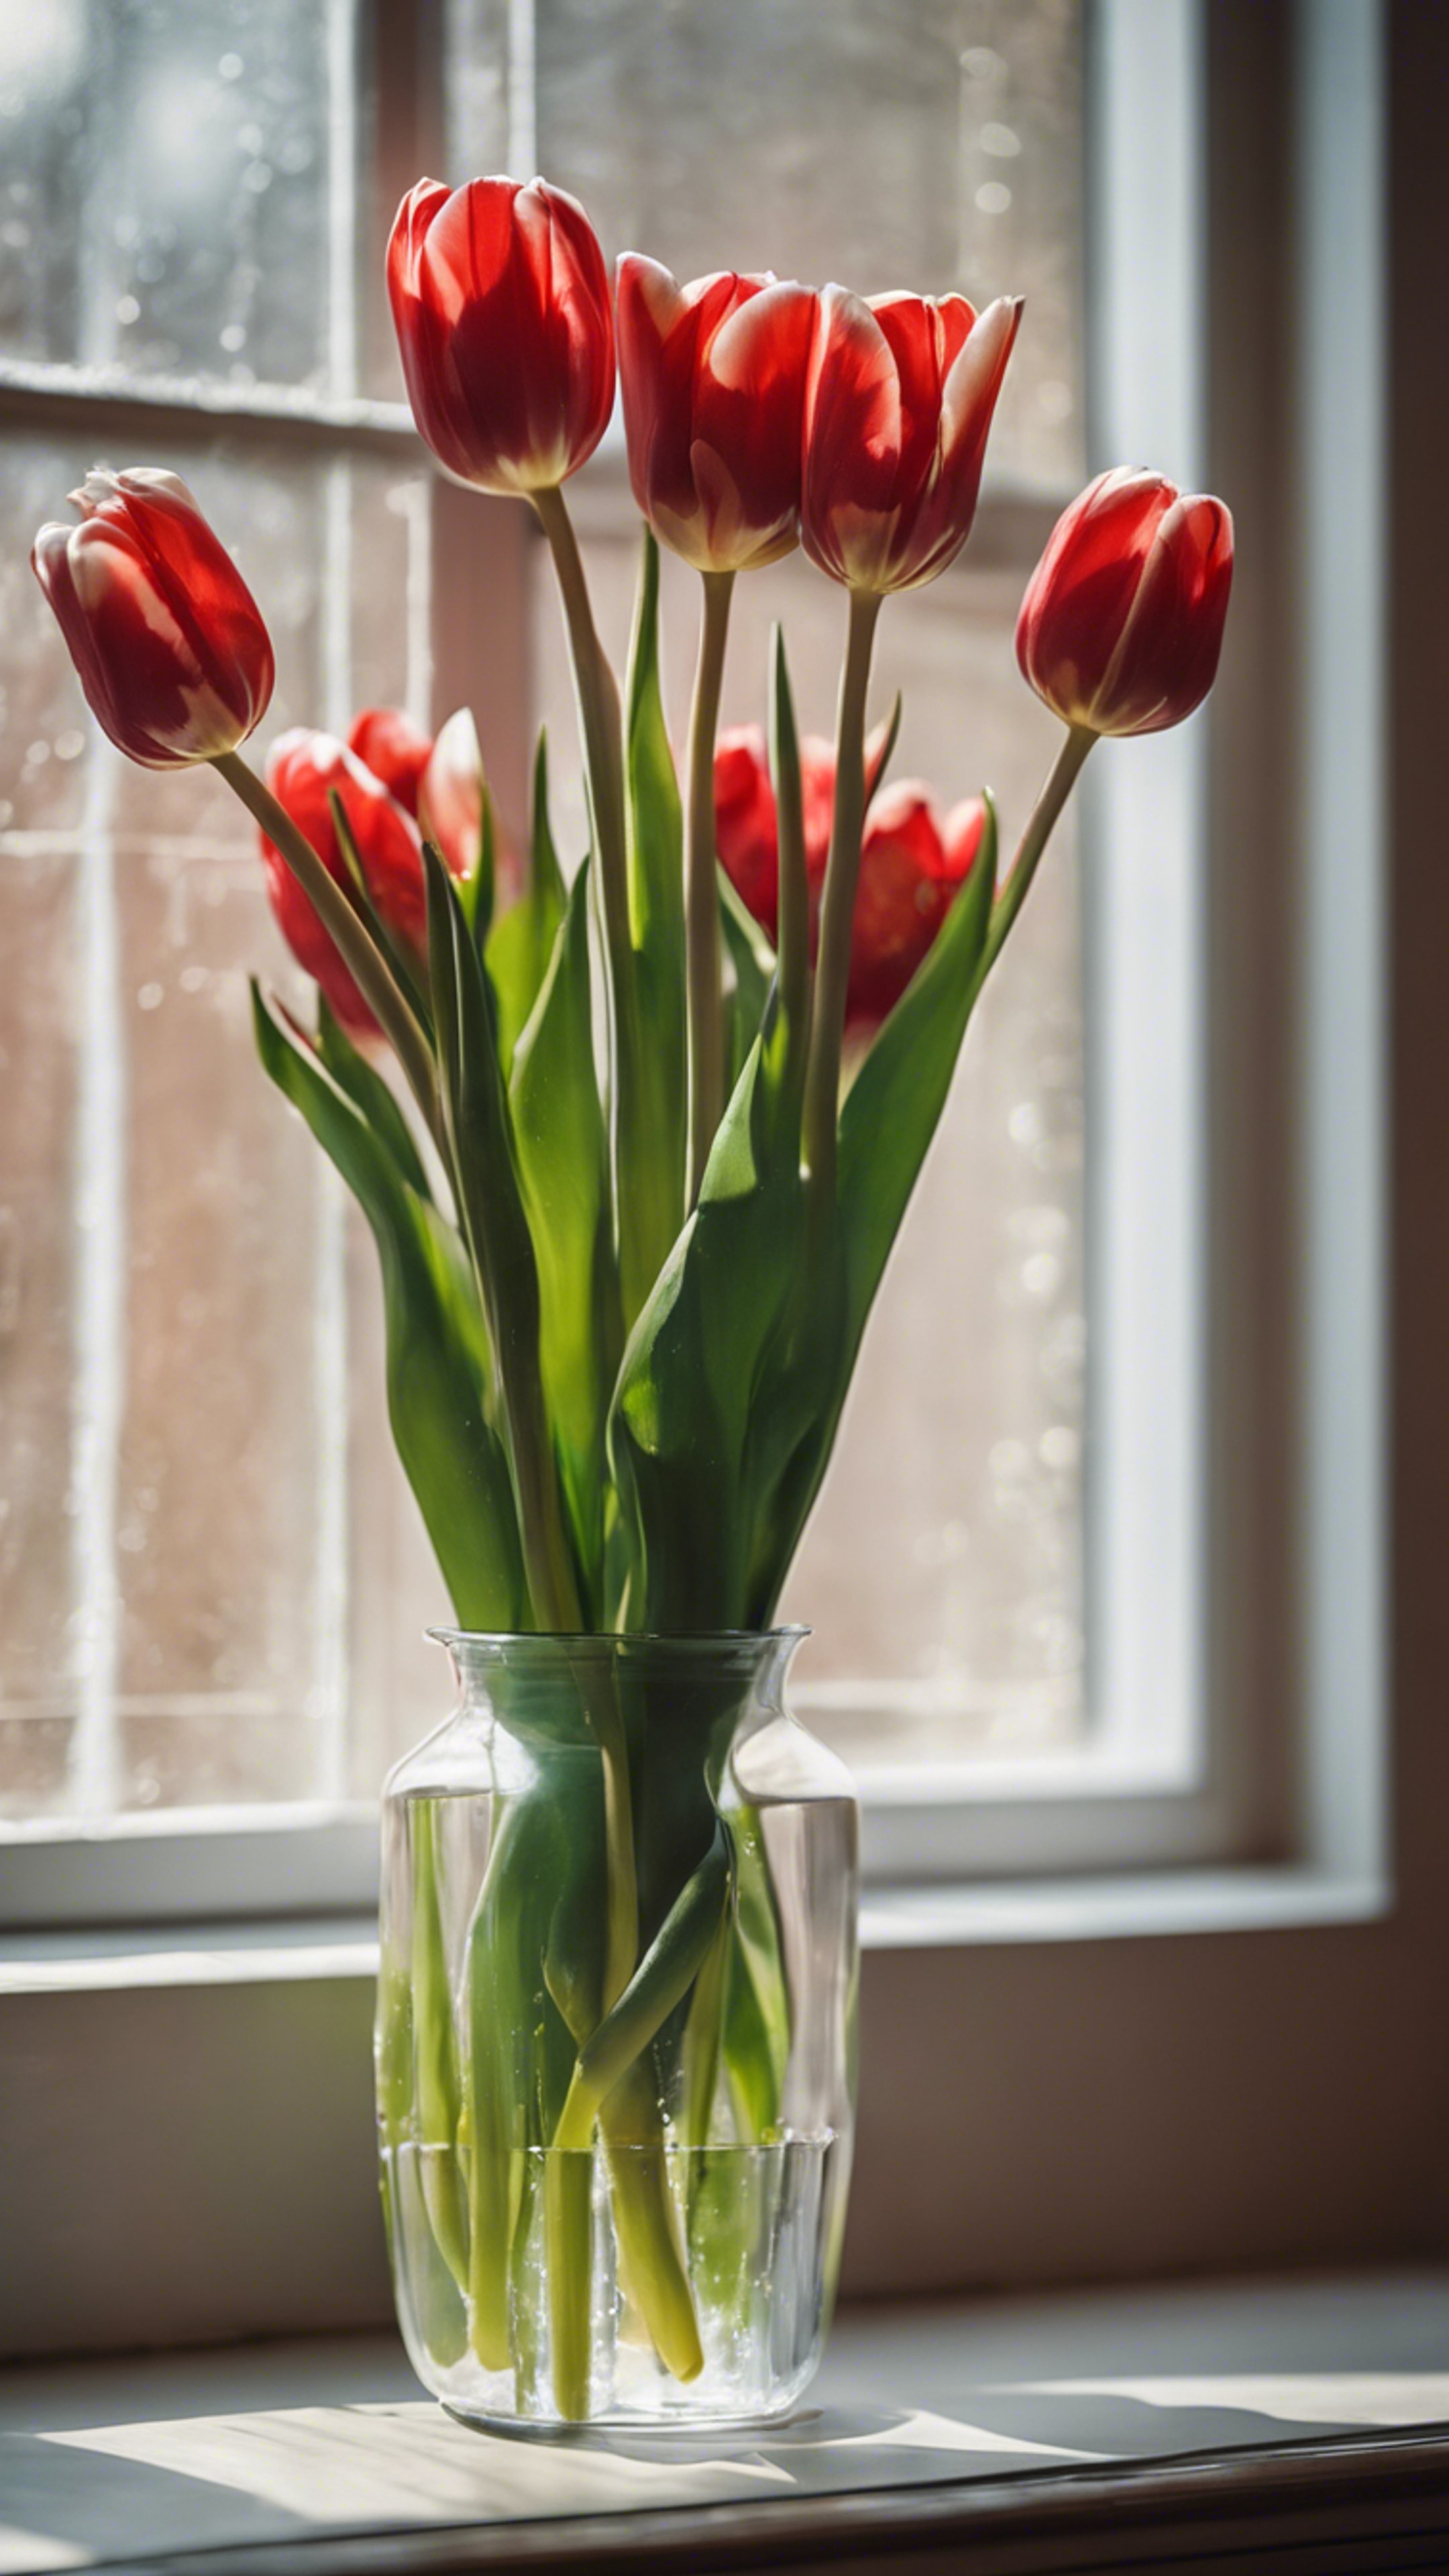 A bunch of vivid red and white tulips in a glass vase, lit by natural light. 벽지[fc69acd6917c413b913f]